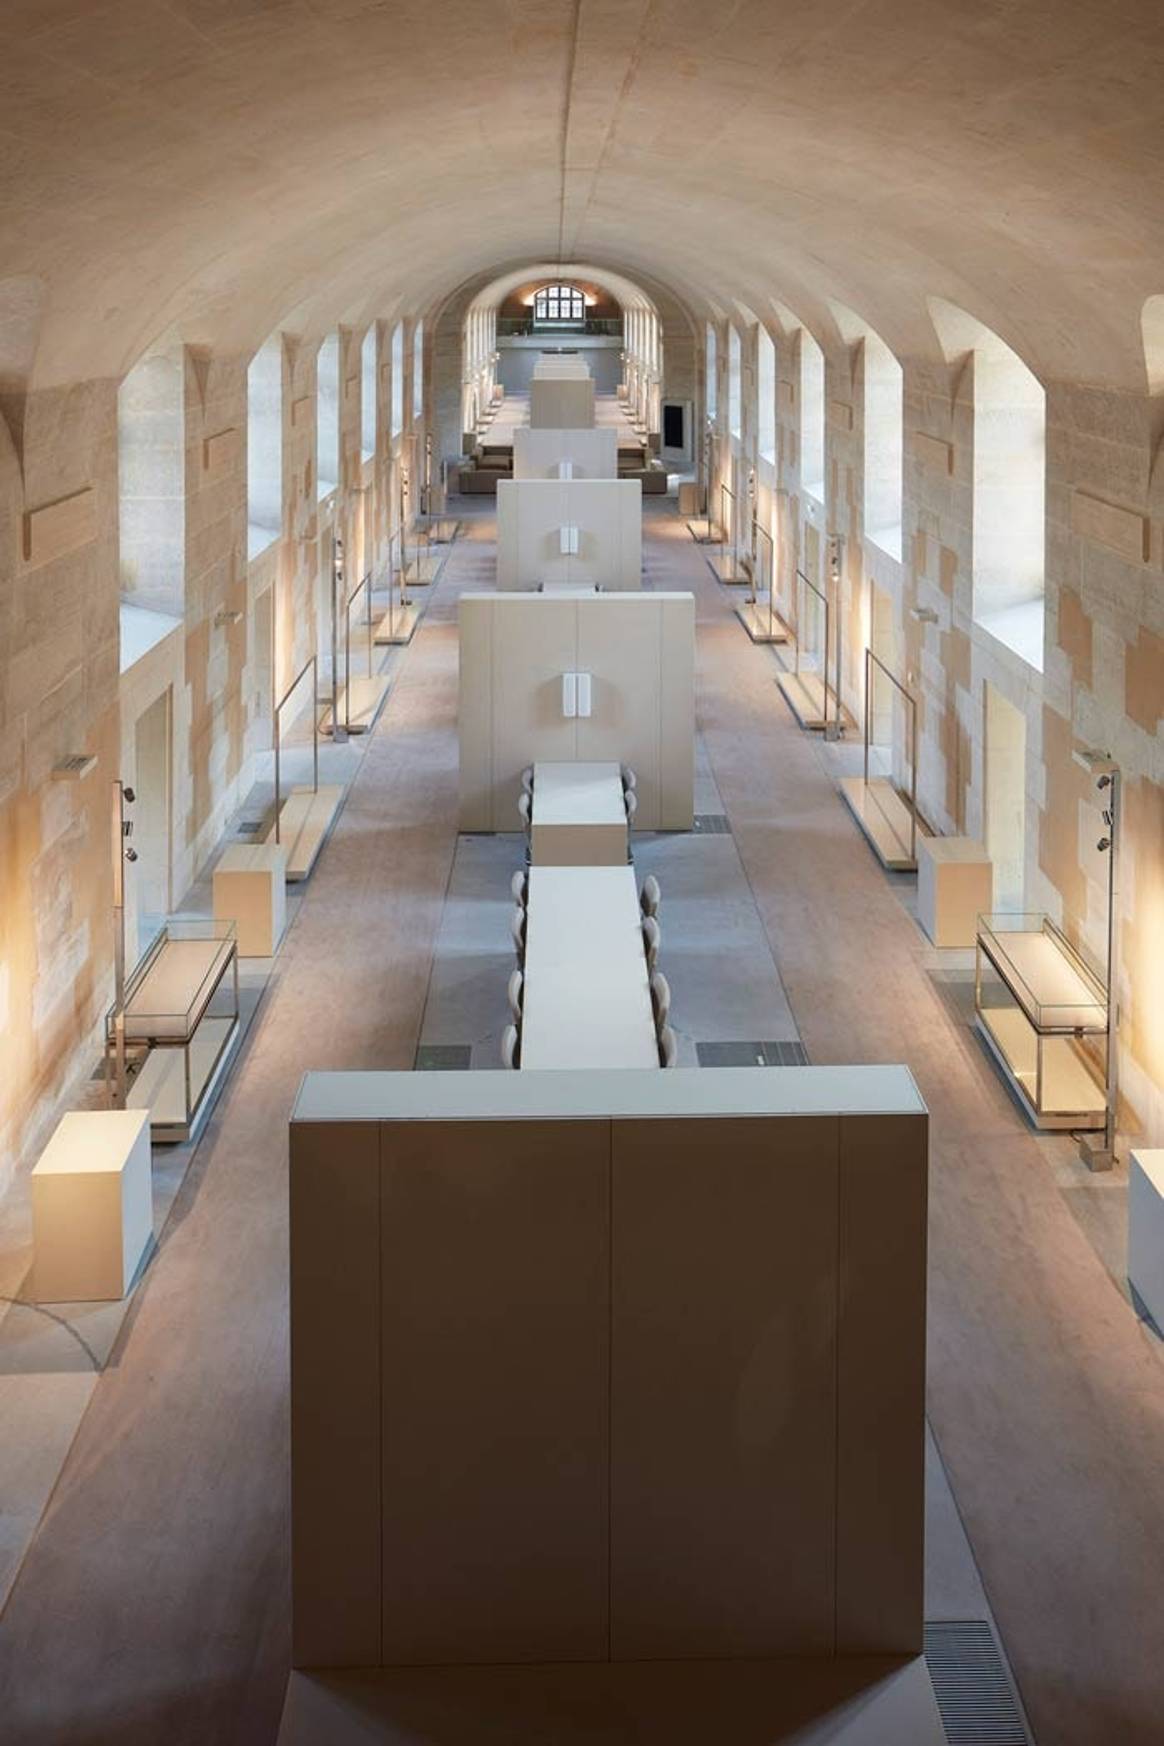 Kering opens head office to the public for 2016 European Heritage Days